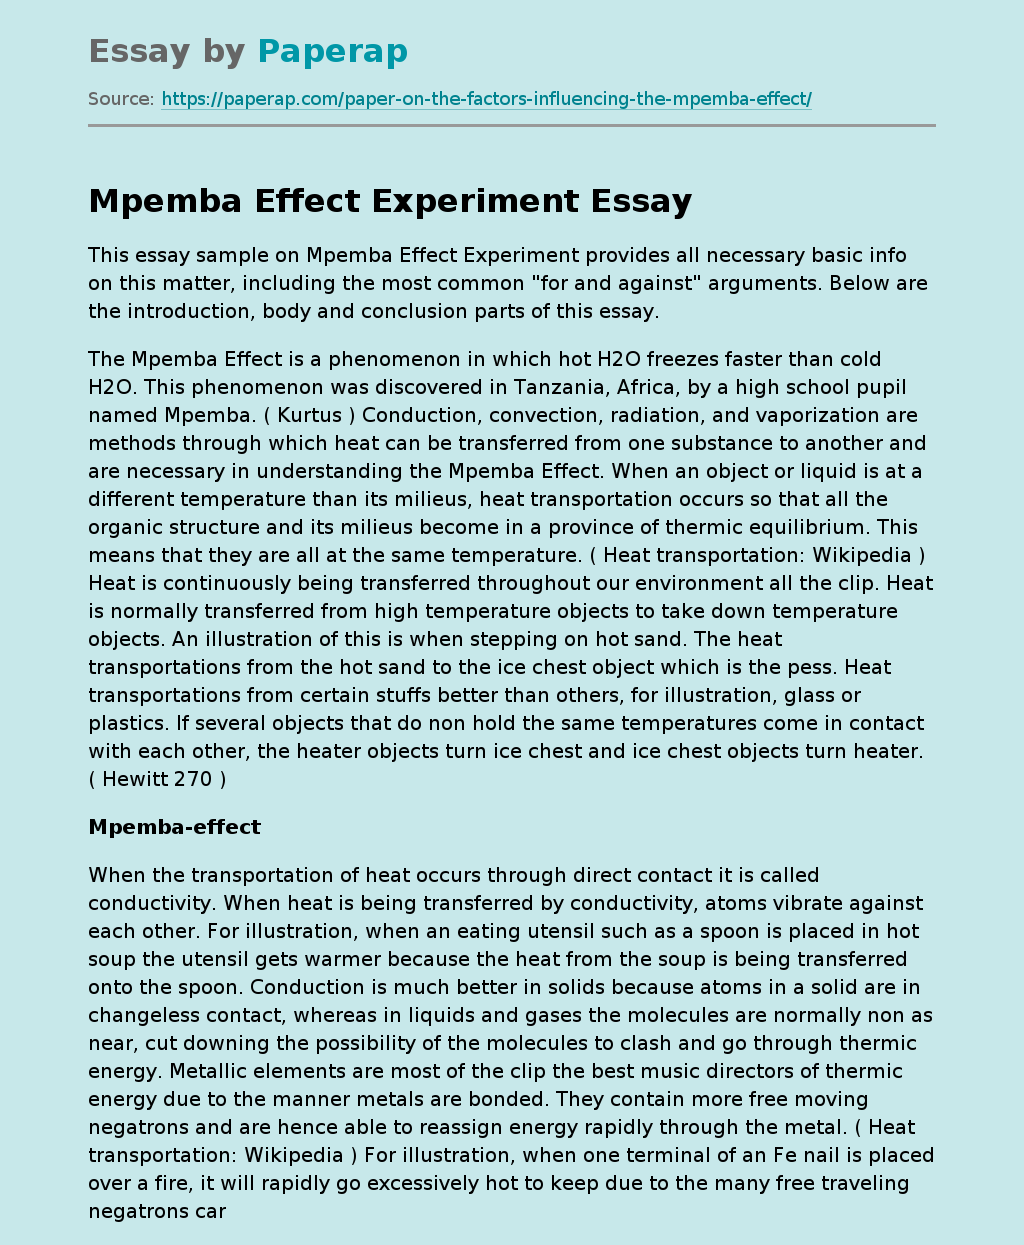 Essay Sample on Mpemba Effect Experiment